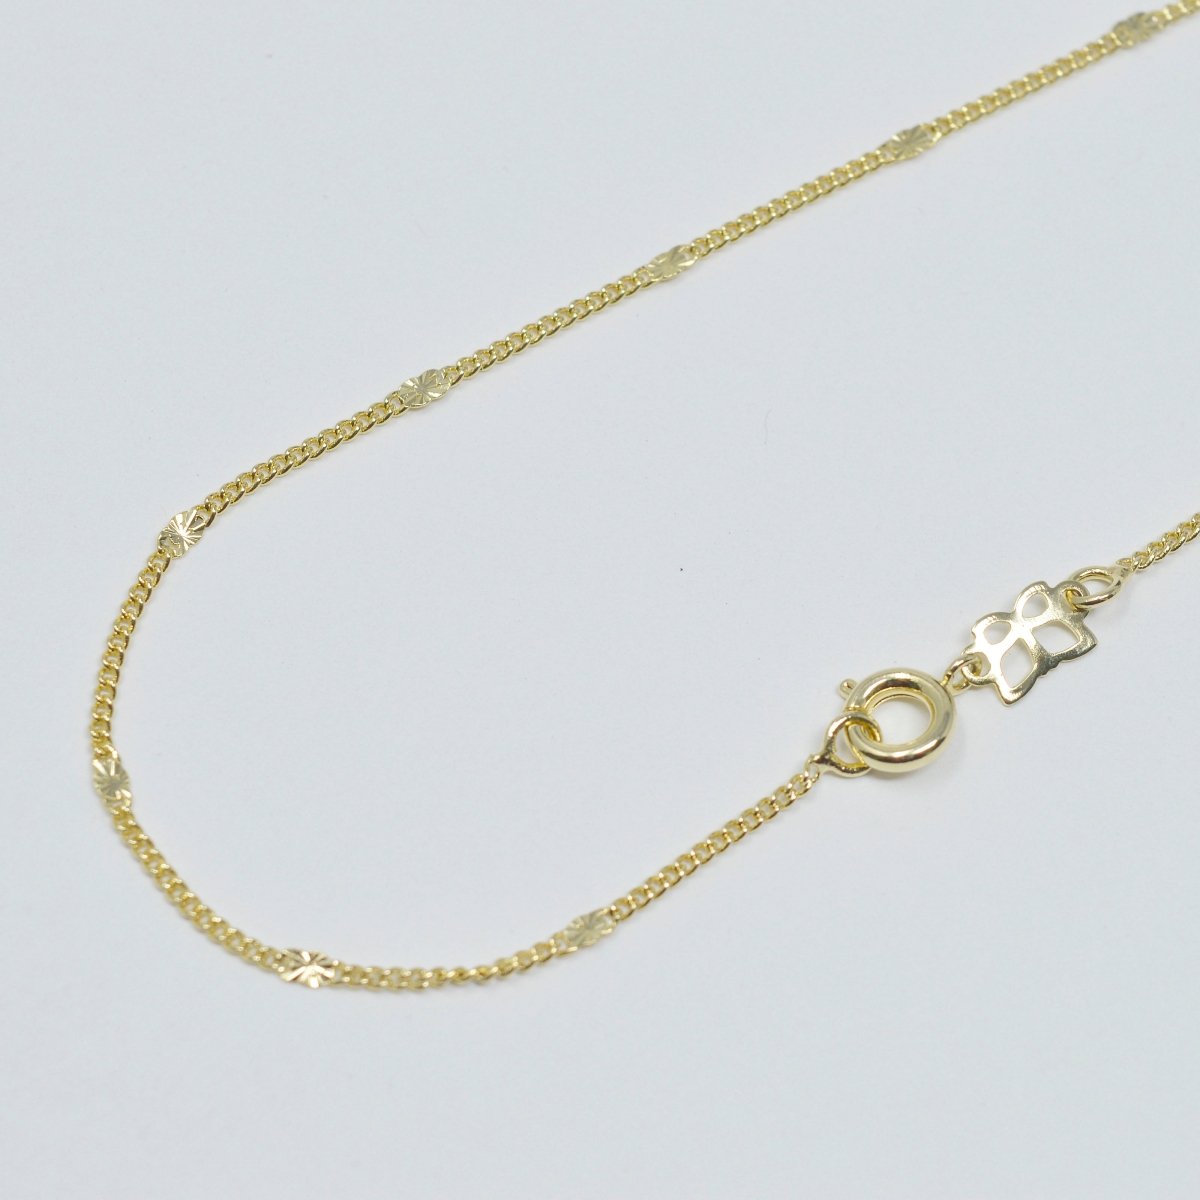 18 inch Singapore Chain Necklace, 14K Gold Plated Singapore Finished Necklace For Jewelry Making, Dainty 2mm Singapore Necklace w/ Spring Ring | CN-958 Clearance Pricing - DLUXCA